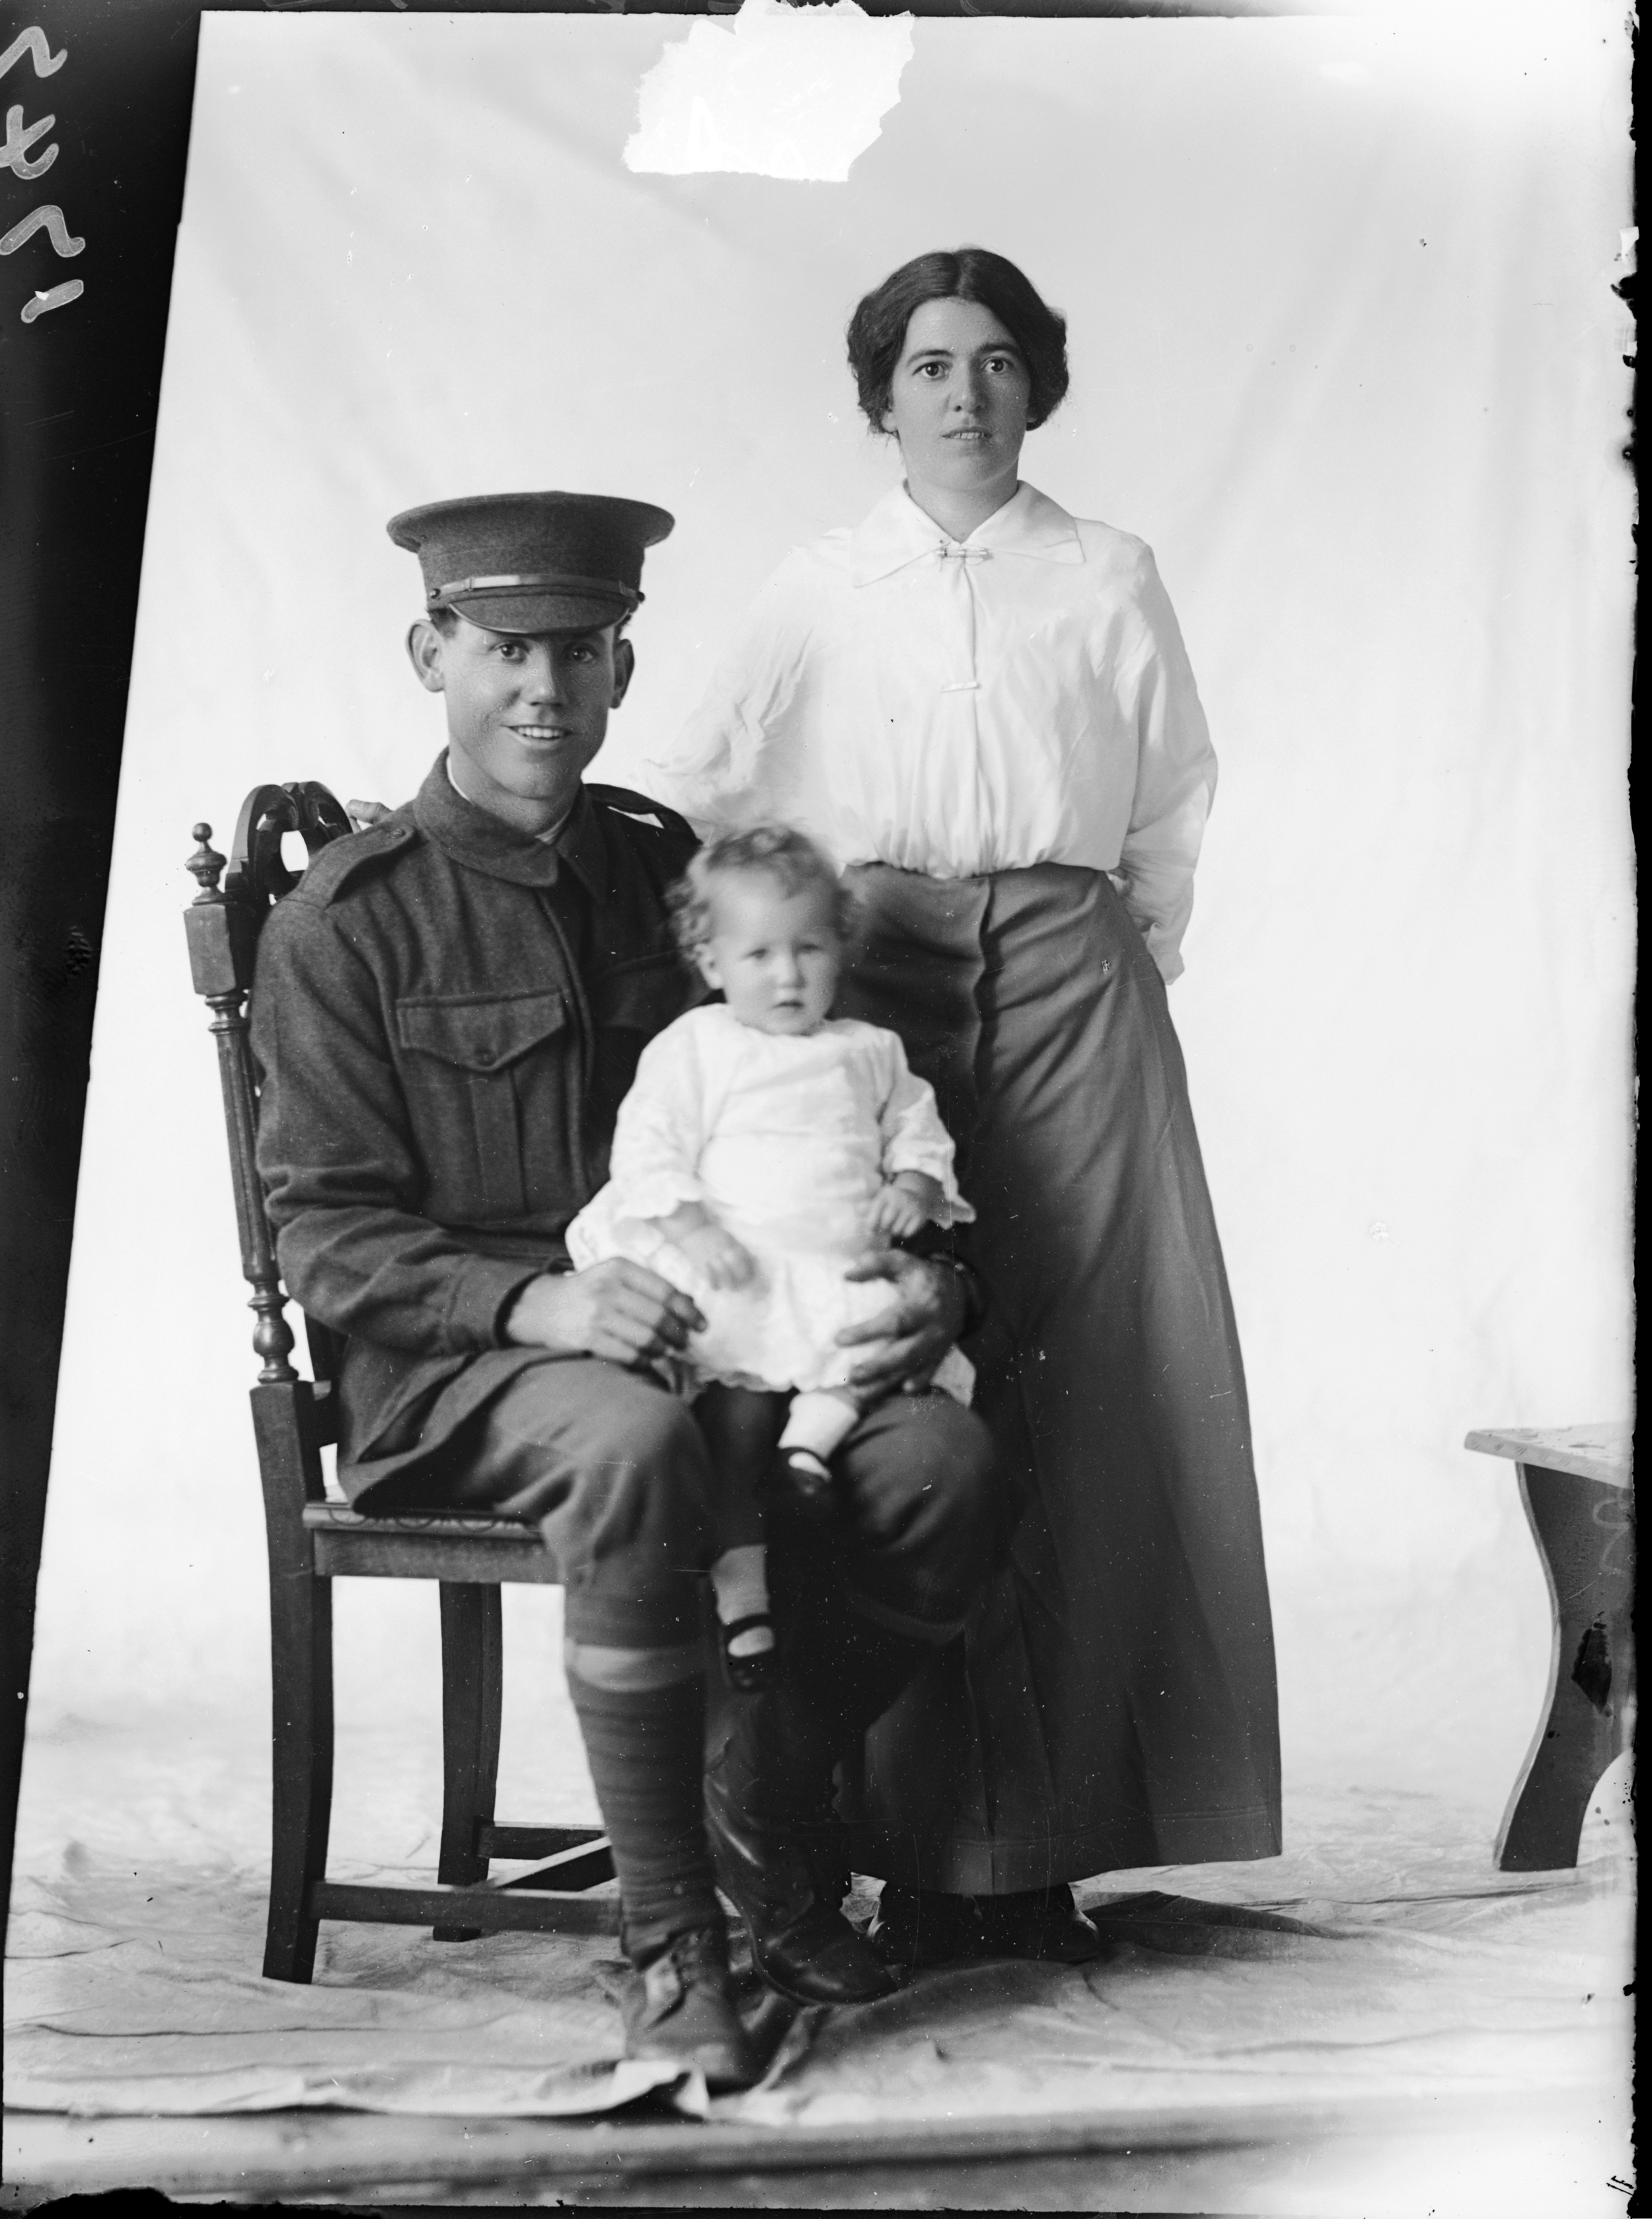 Photographed at the Dease Studio, 117 Barrack Street Perth WA Image courtesy of the State Library of Western Australia: 1083337PD